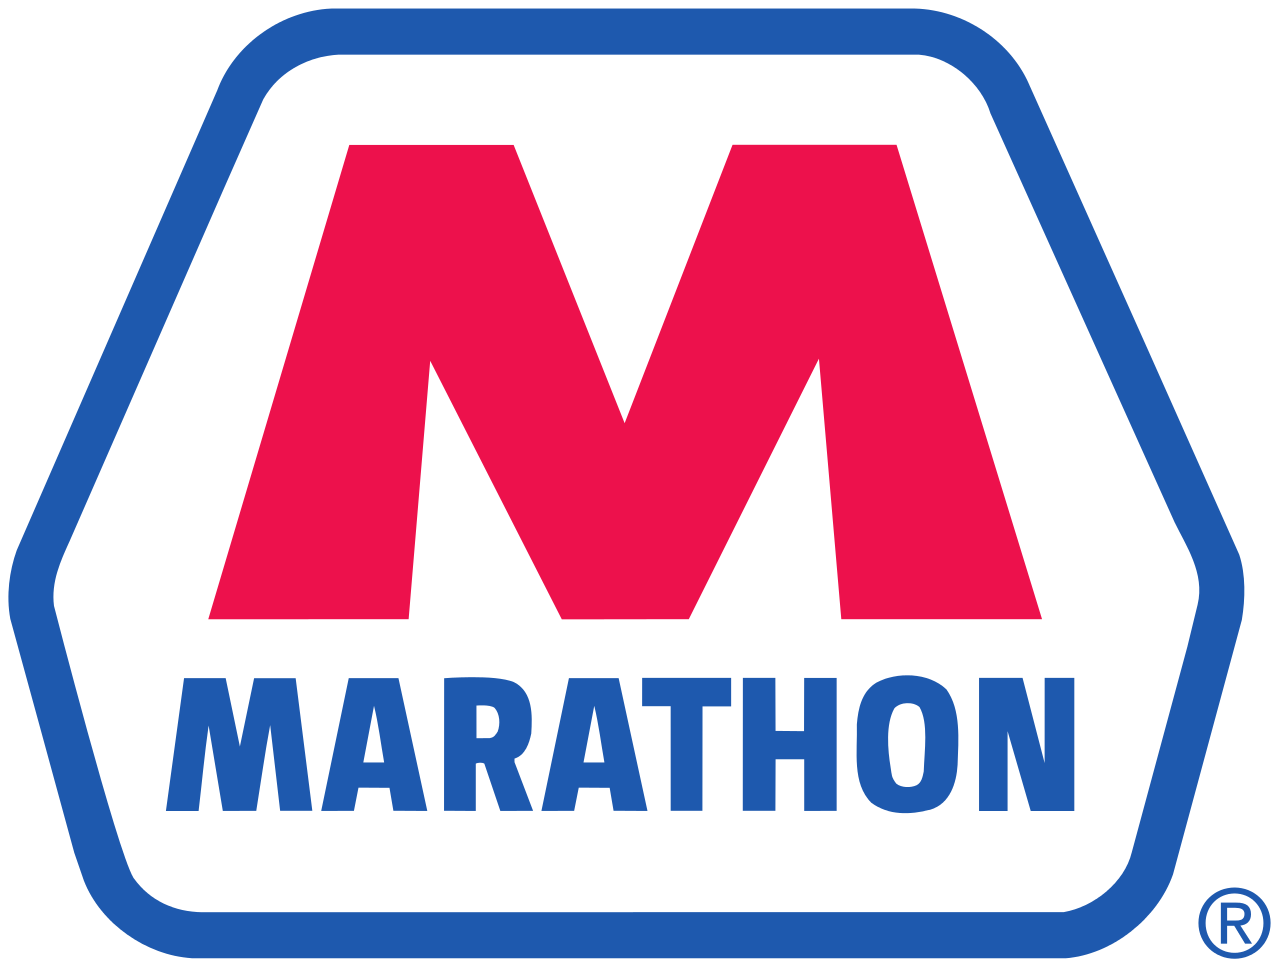 Marathon gas station logo, characterized by a blue and red color scheme.